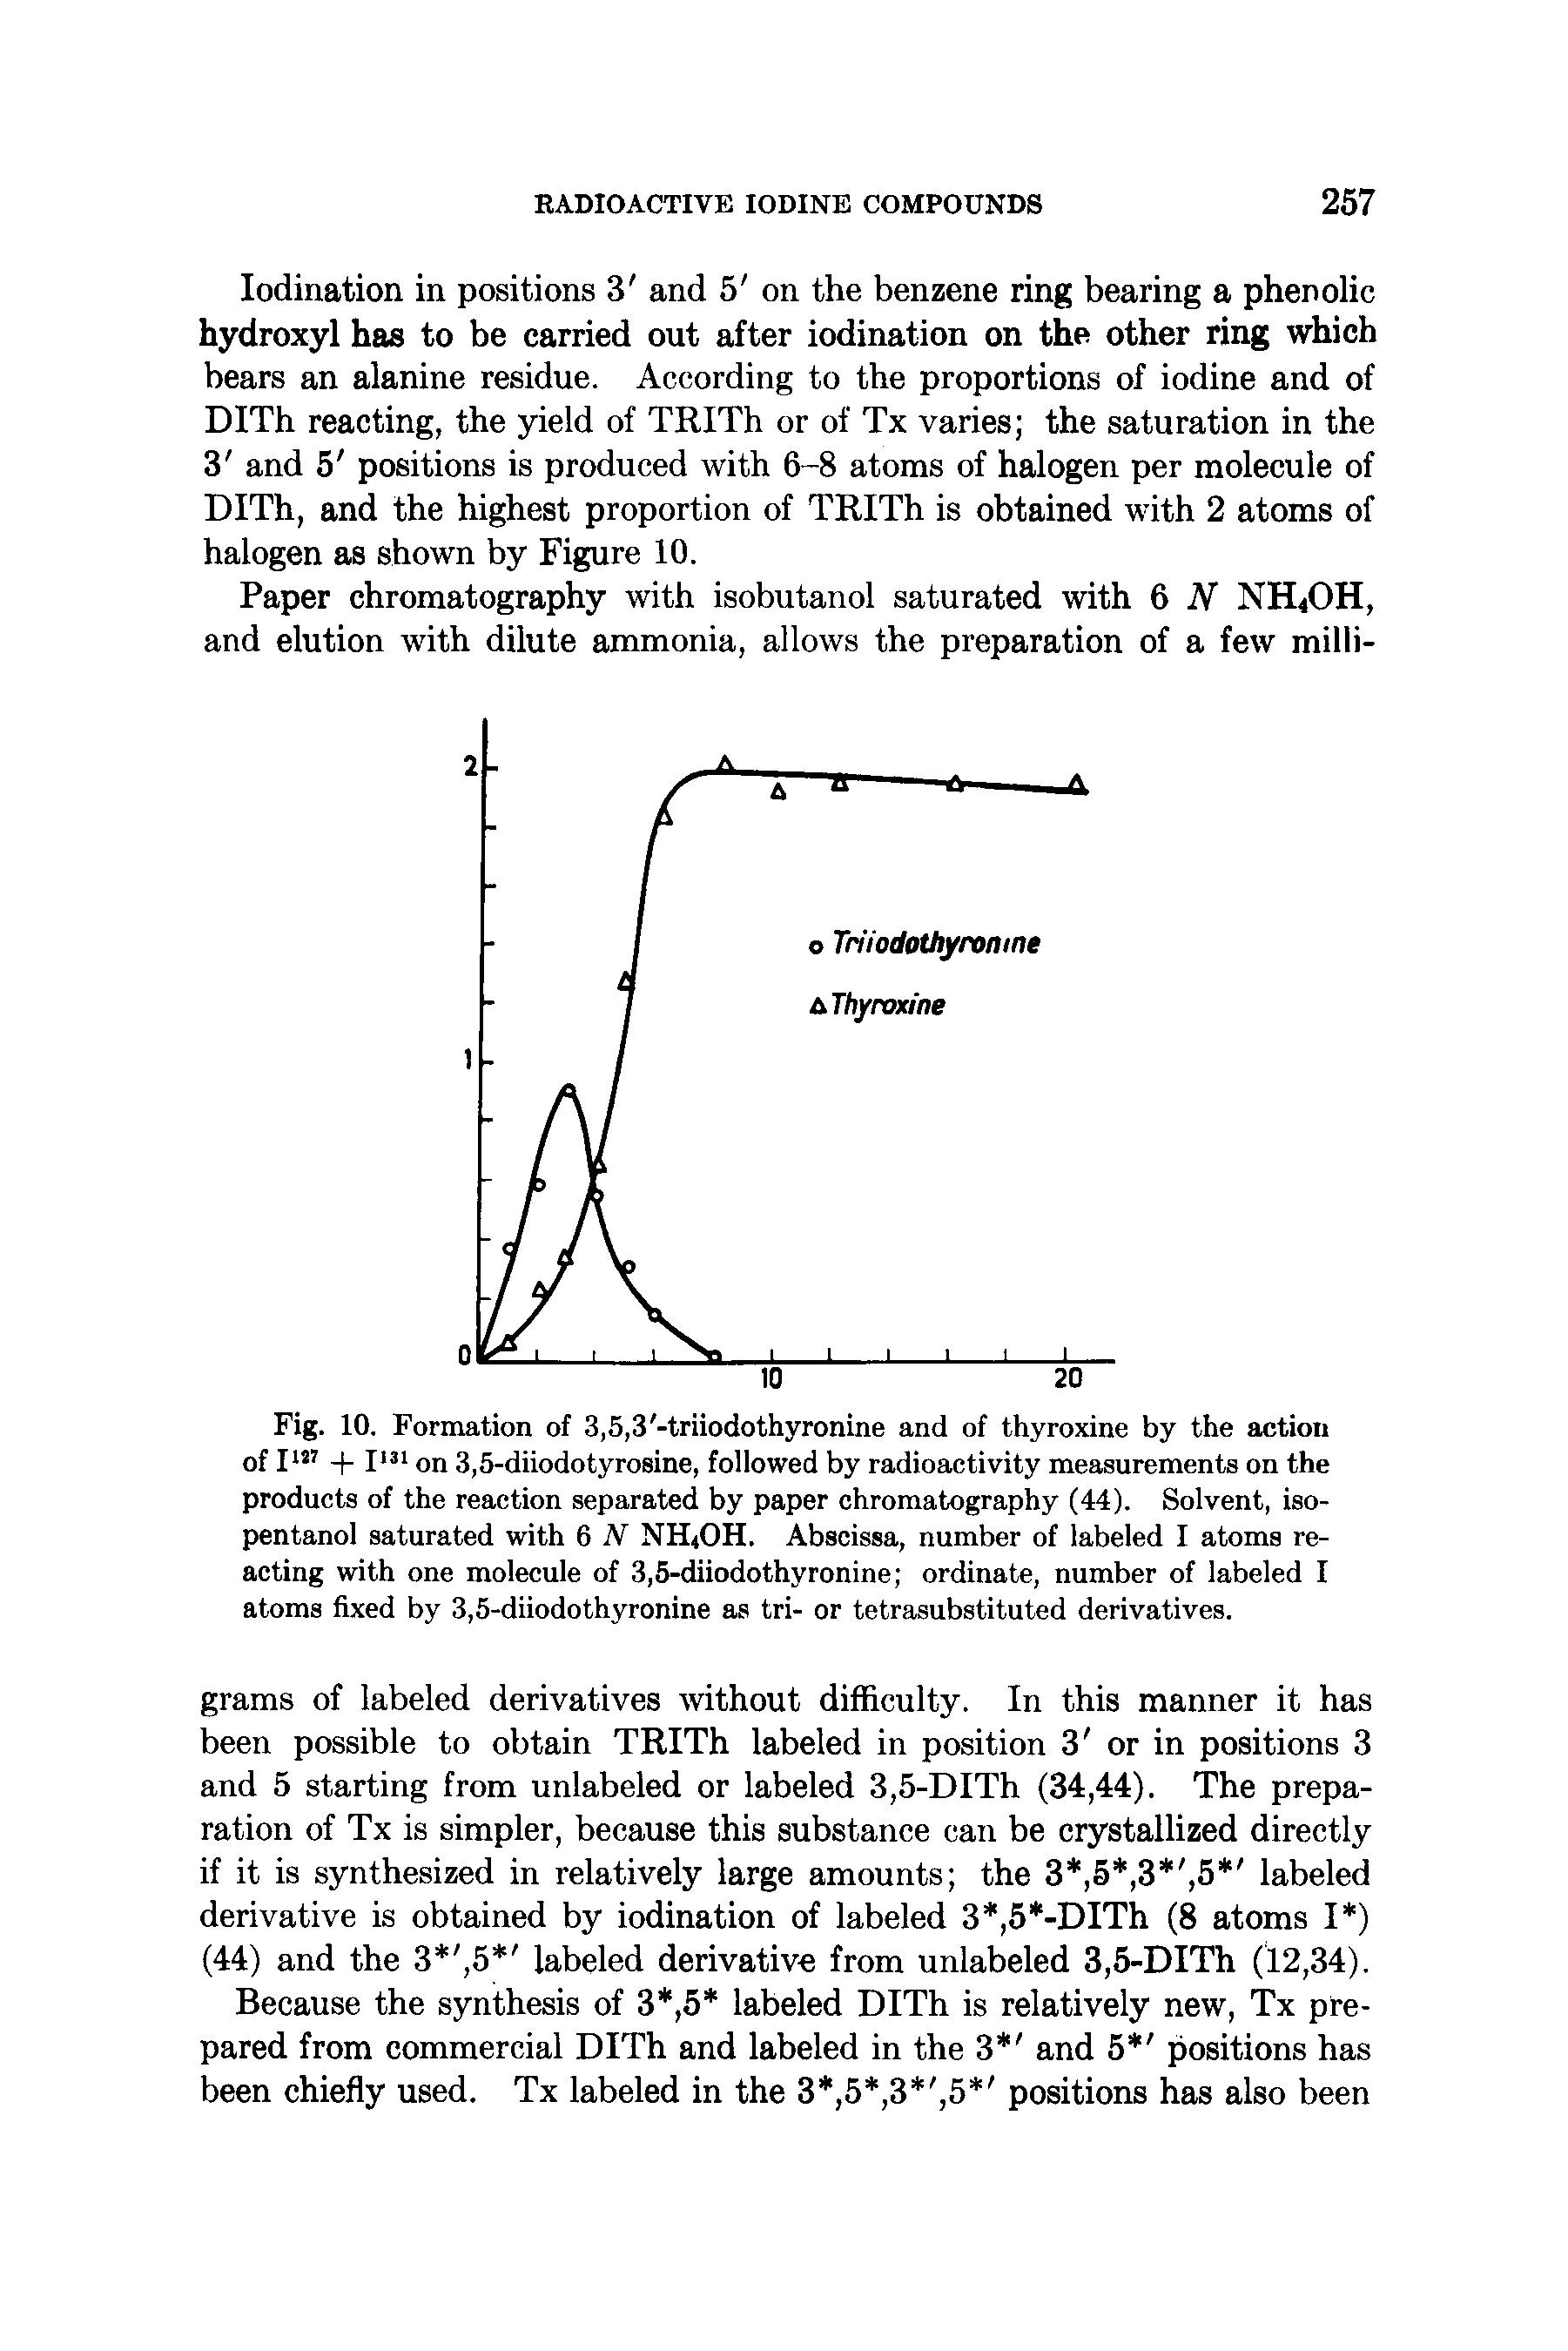 Fig. 10. Formation of 3,5,3 -triiodothyronine and of thyroxine by the action of I + on 3,5-diiodotyrosine, followed by radioactivity measurements on the products of the reaction separated by paper chromatography (44). Solvent, iso-pentanol saturated with 6 N NH OH. Abscissa, number of labeled I atoms reacting with one molecule of 3,5-diiodothyronine ordinate, number of labeled I atoms fixed by 3,5-diiodothyronine as tri- or tetrasubstituted derivatives.